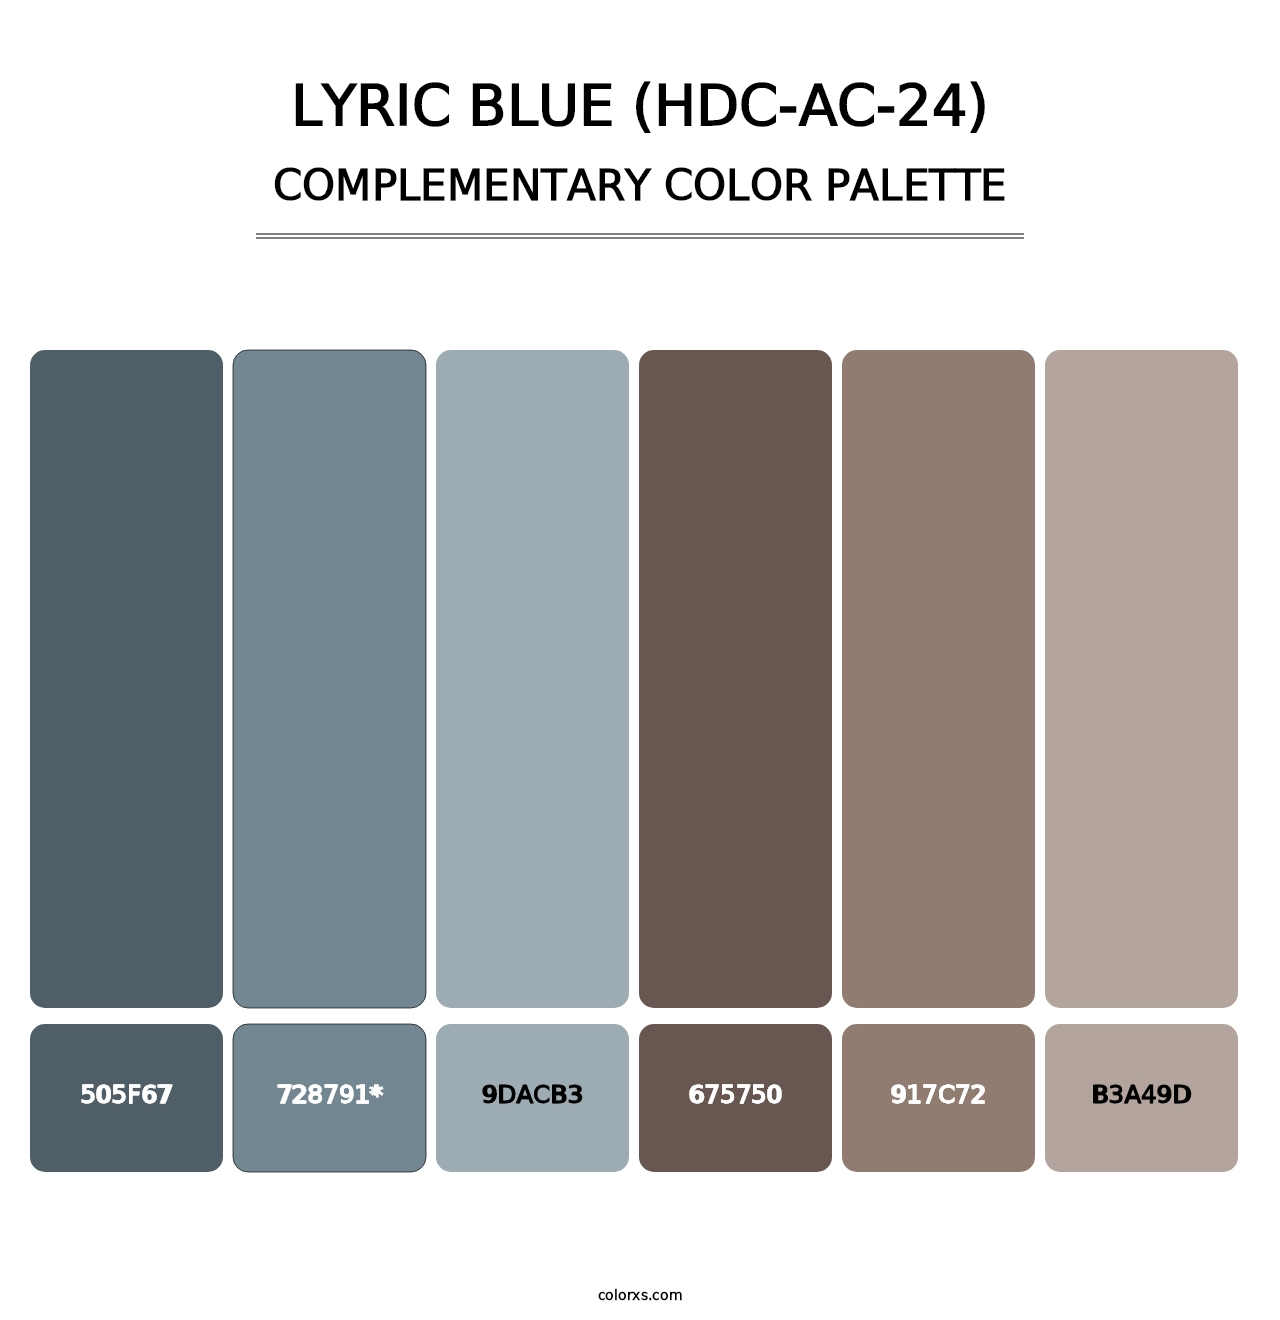 Lyric Blue (HDC-AC-24) - Complementary Color Palette